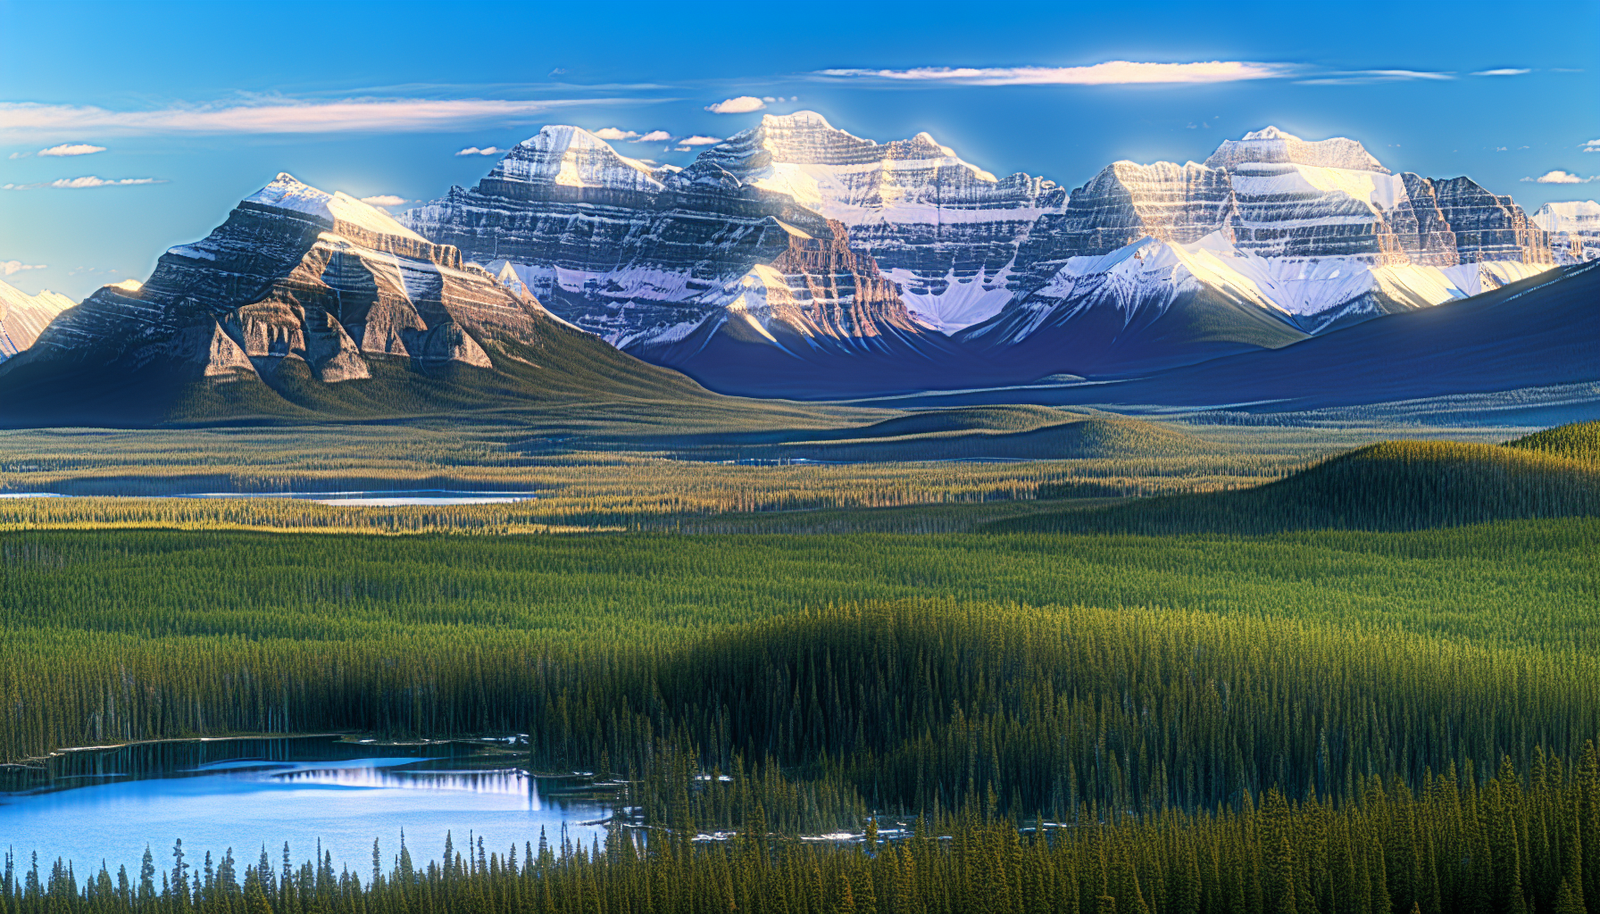 Breathtaking view of the Canadian Rockies